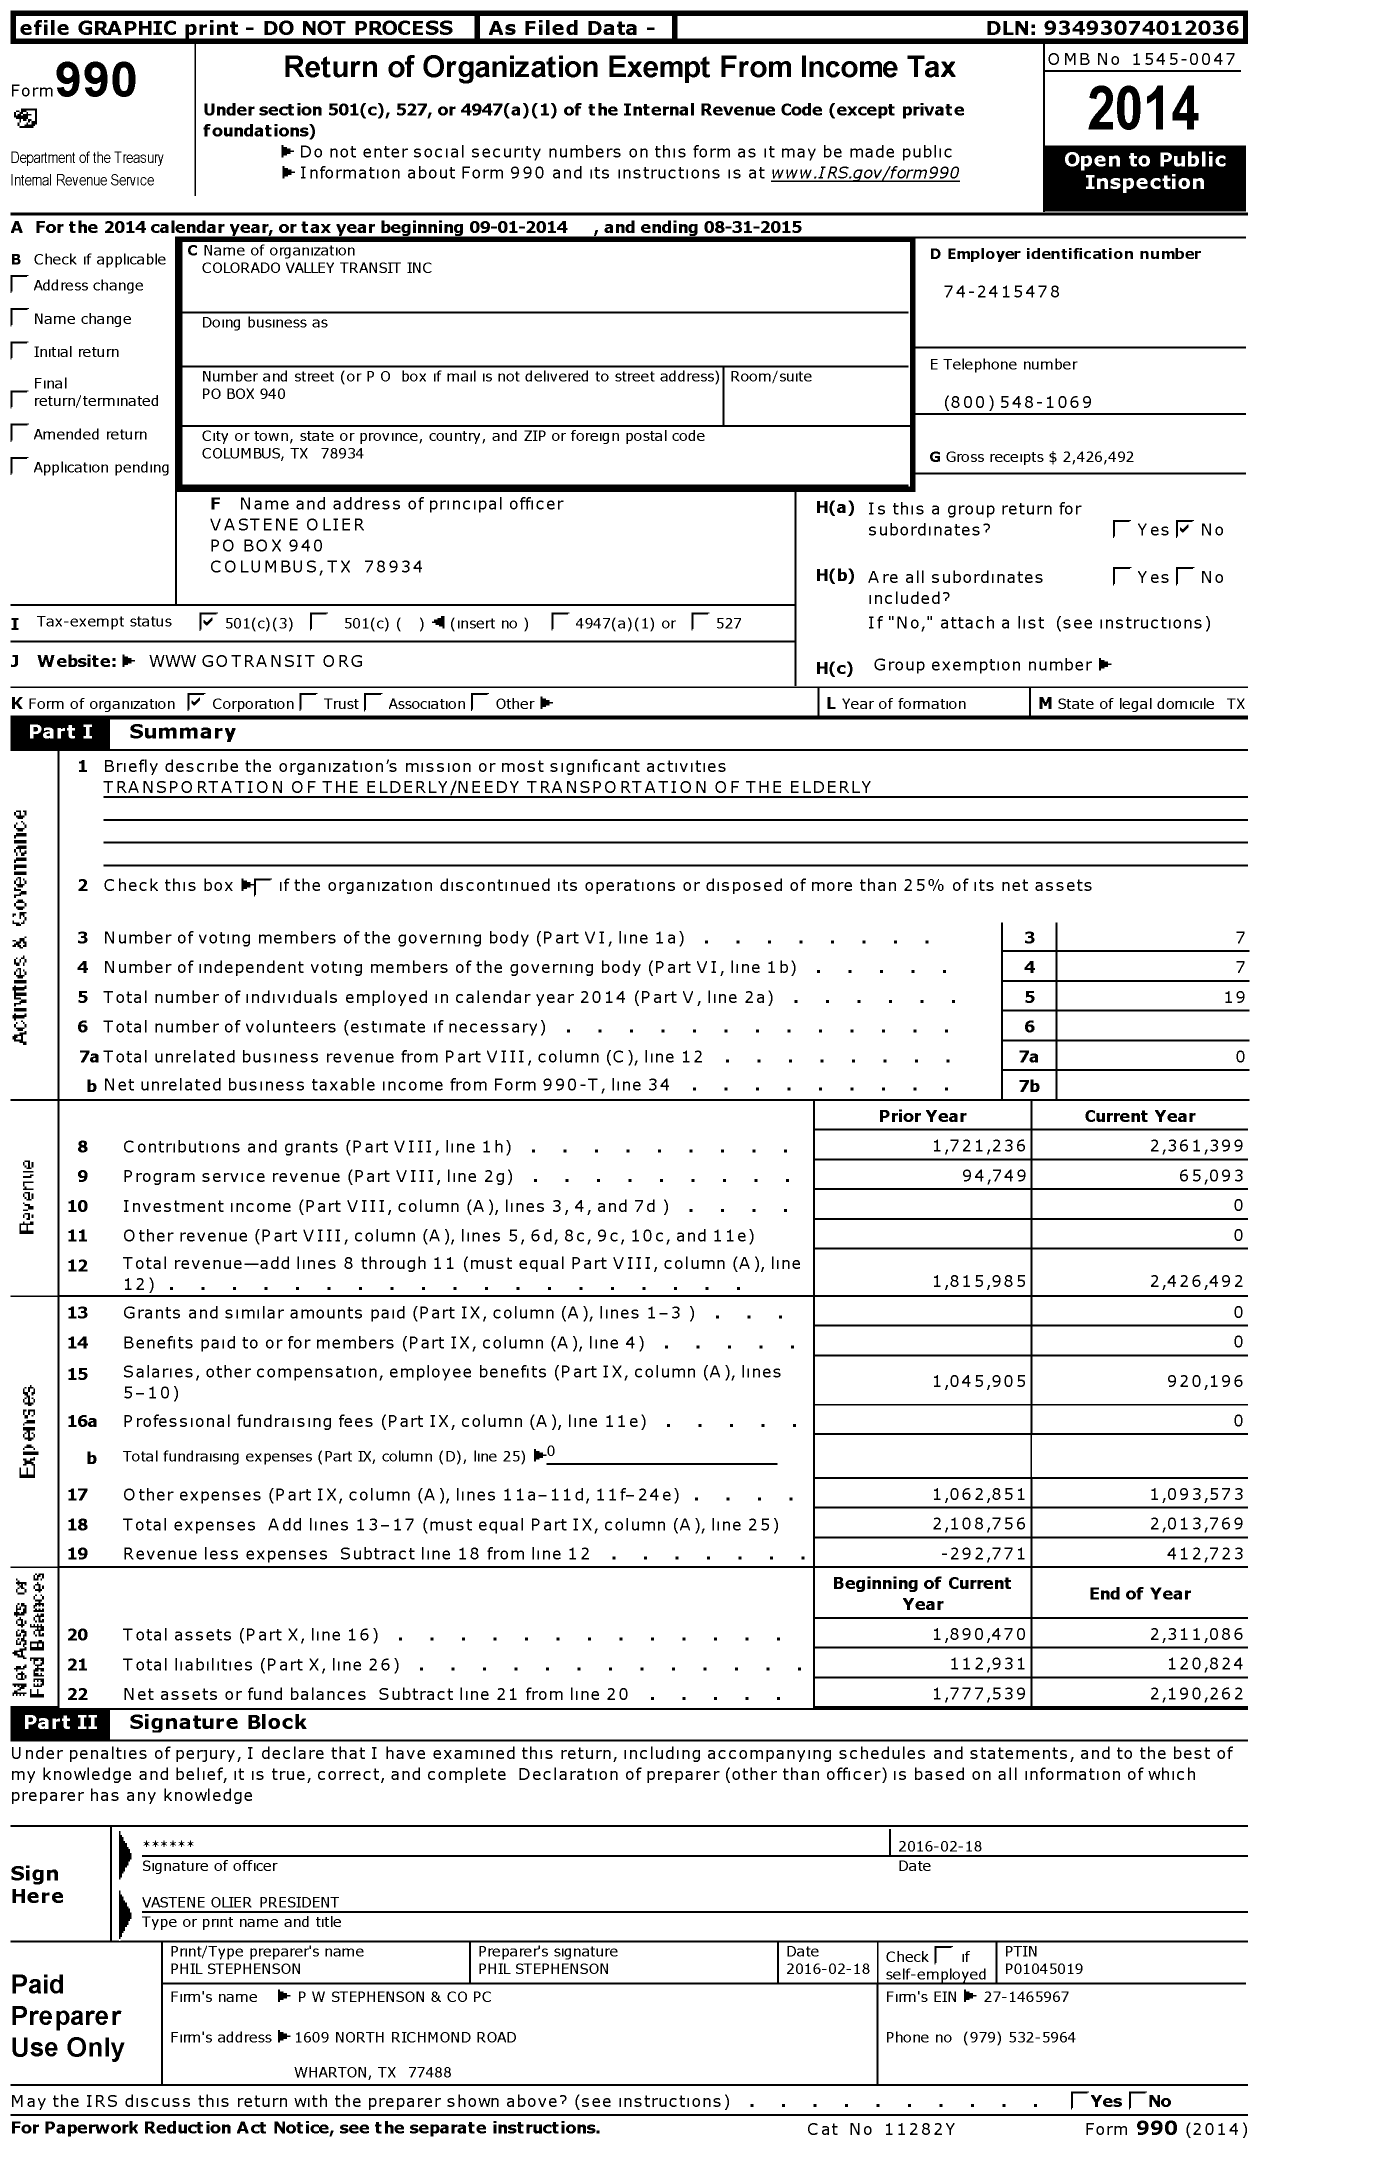 Image of first page of 2014 Form 990 for Colorado Valley Transit Mrsphyllis Toliver Chairman (CVTD)